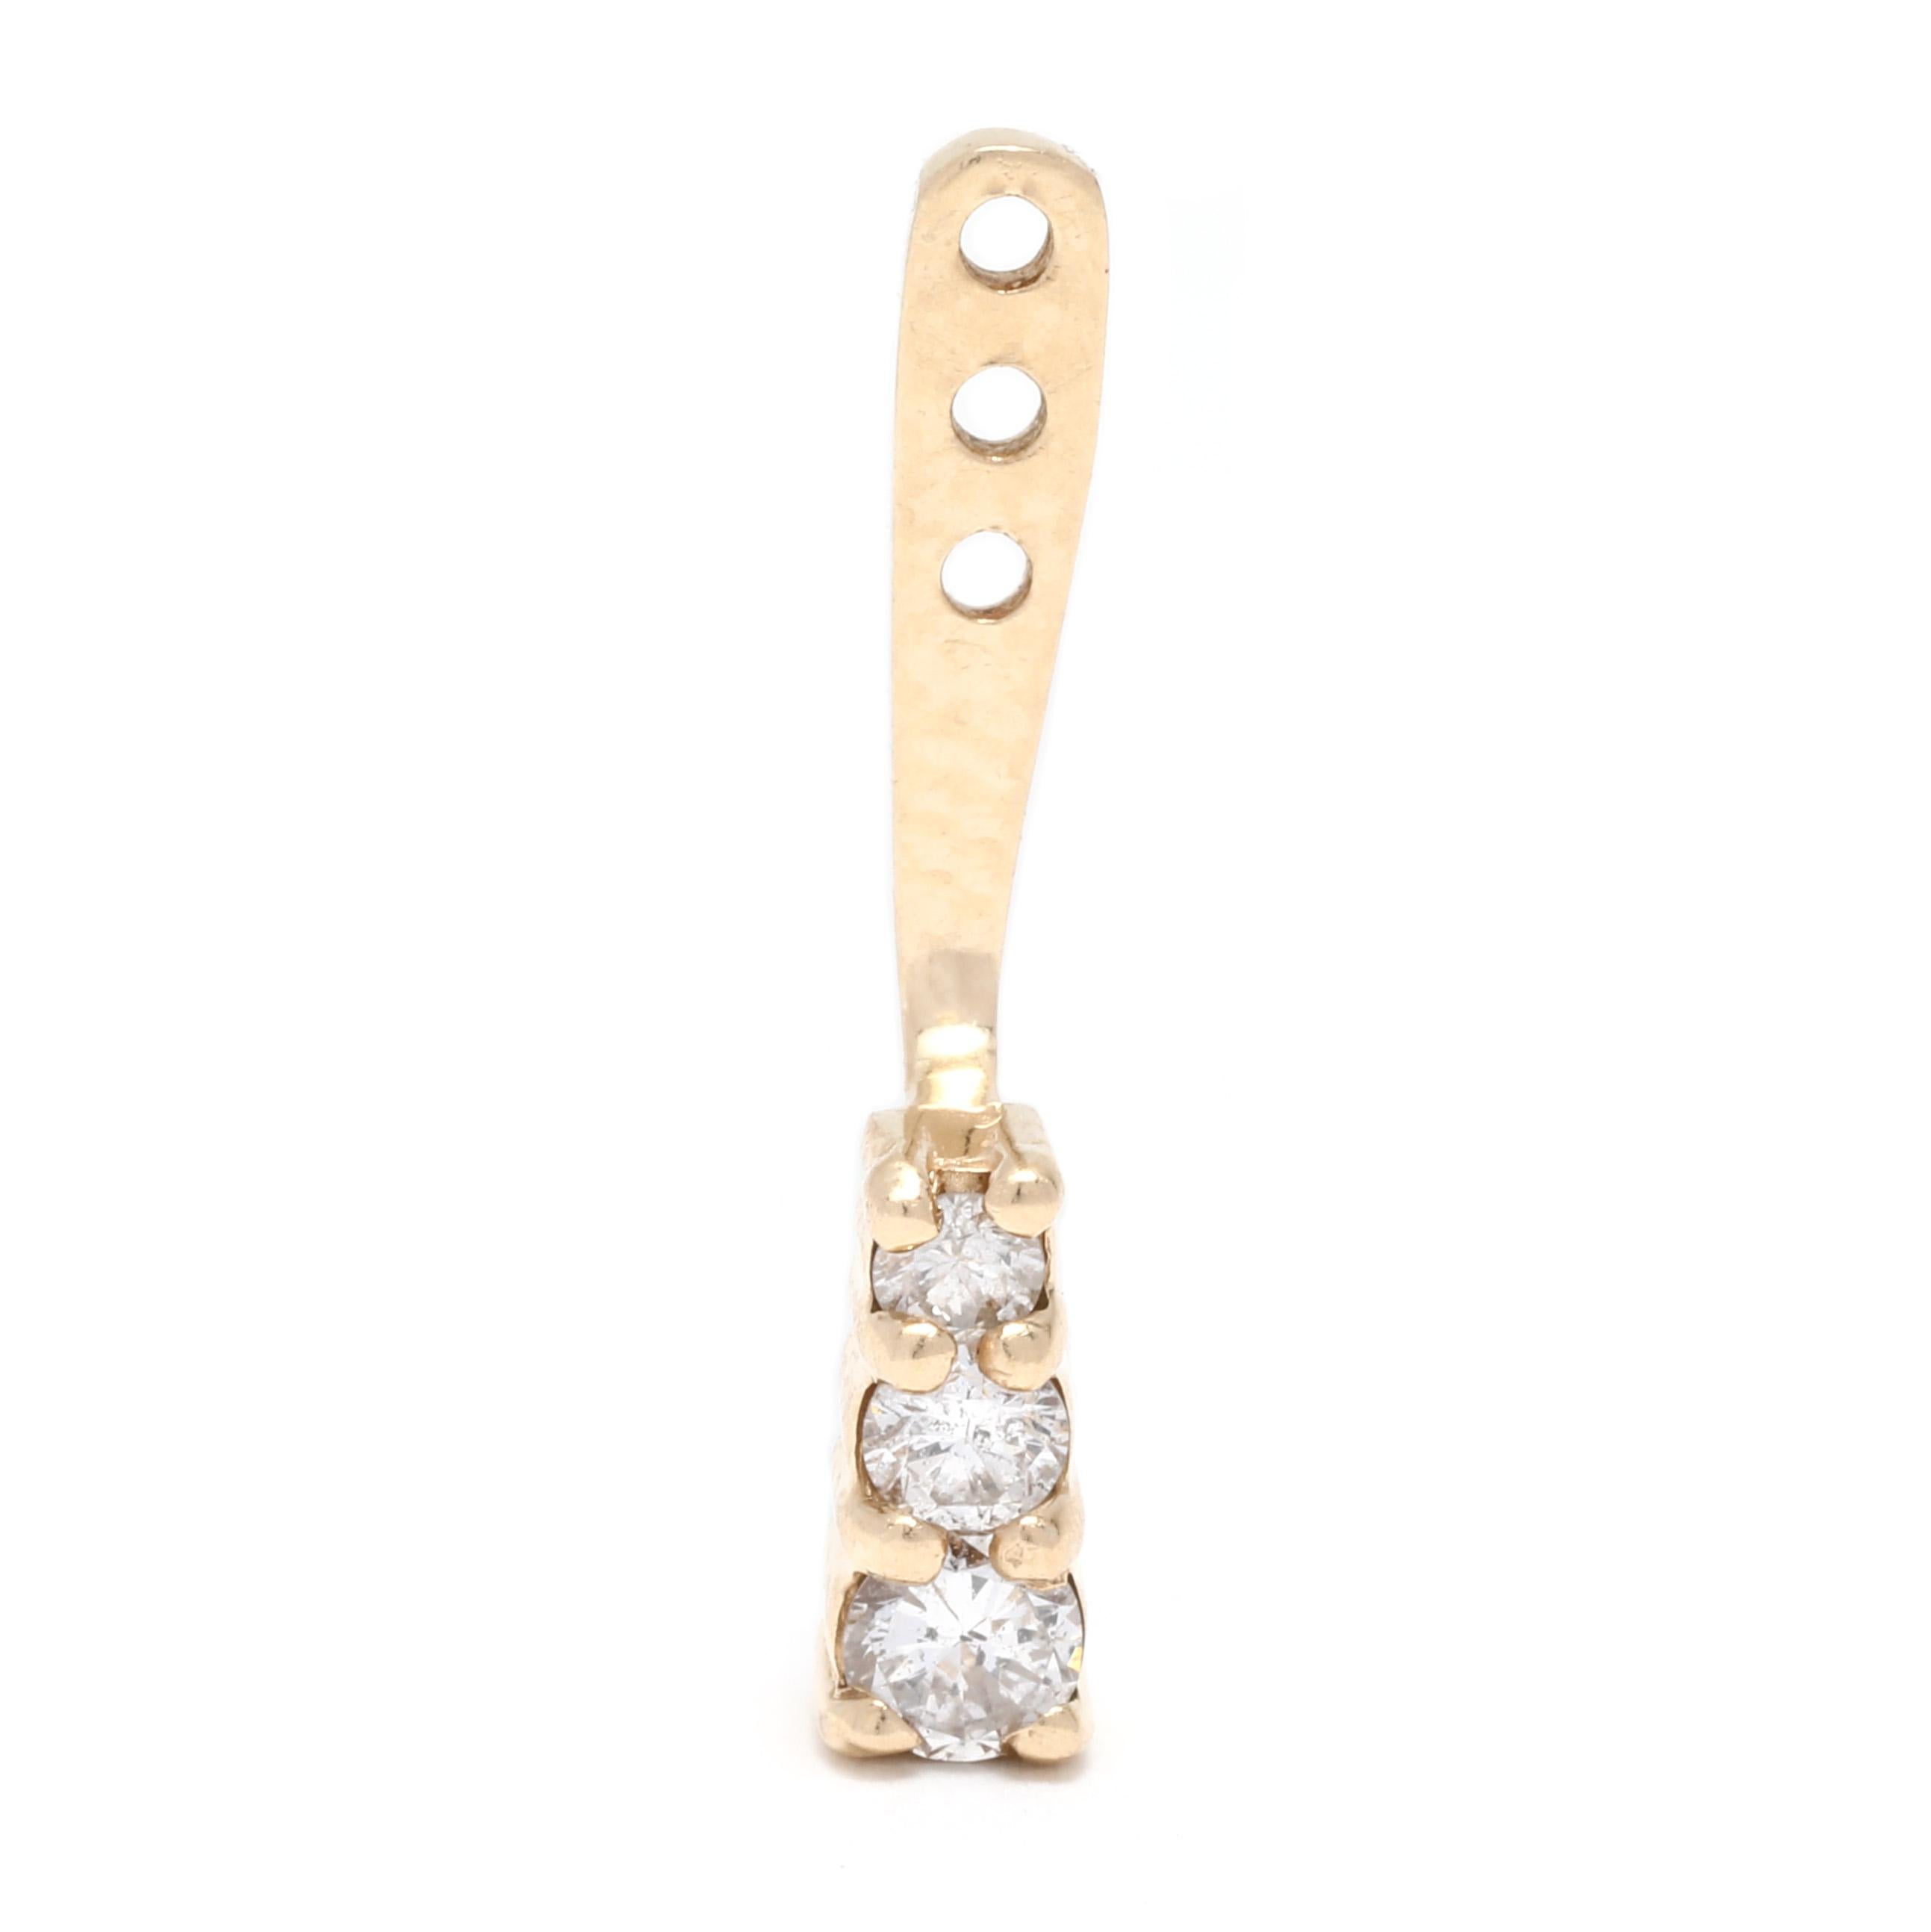 These timeless 0.36ctw diamond dangle earring jackets add the perfect touch of sparkle and elegance to any look. Crafted in 14K yellow gold, these stunning jackets feature 5/8 inch length and are the perfect way to dress up any pair of diamond